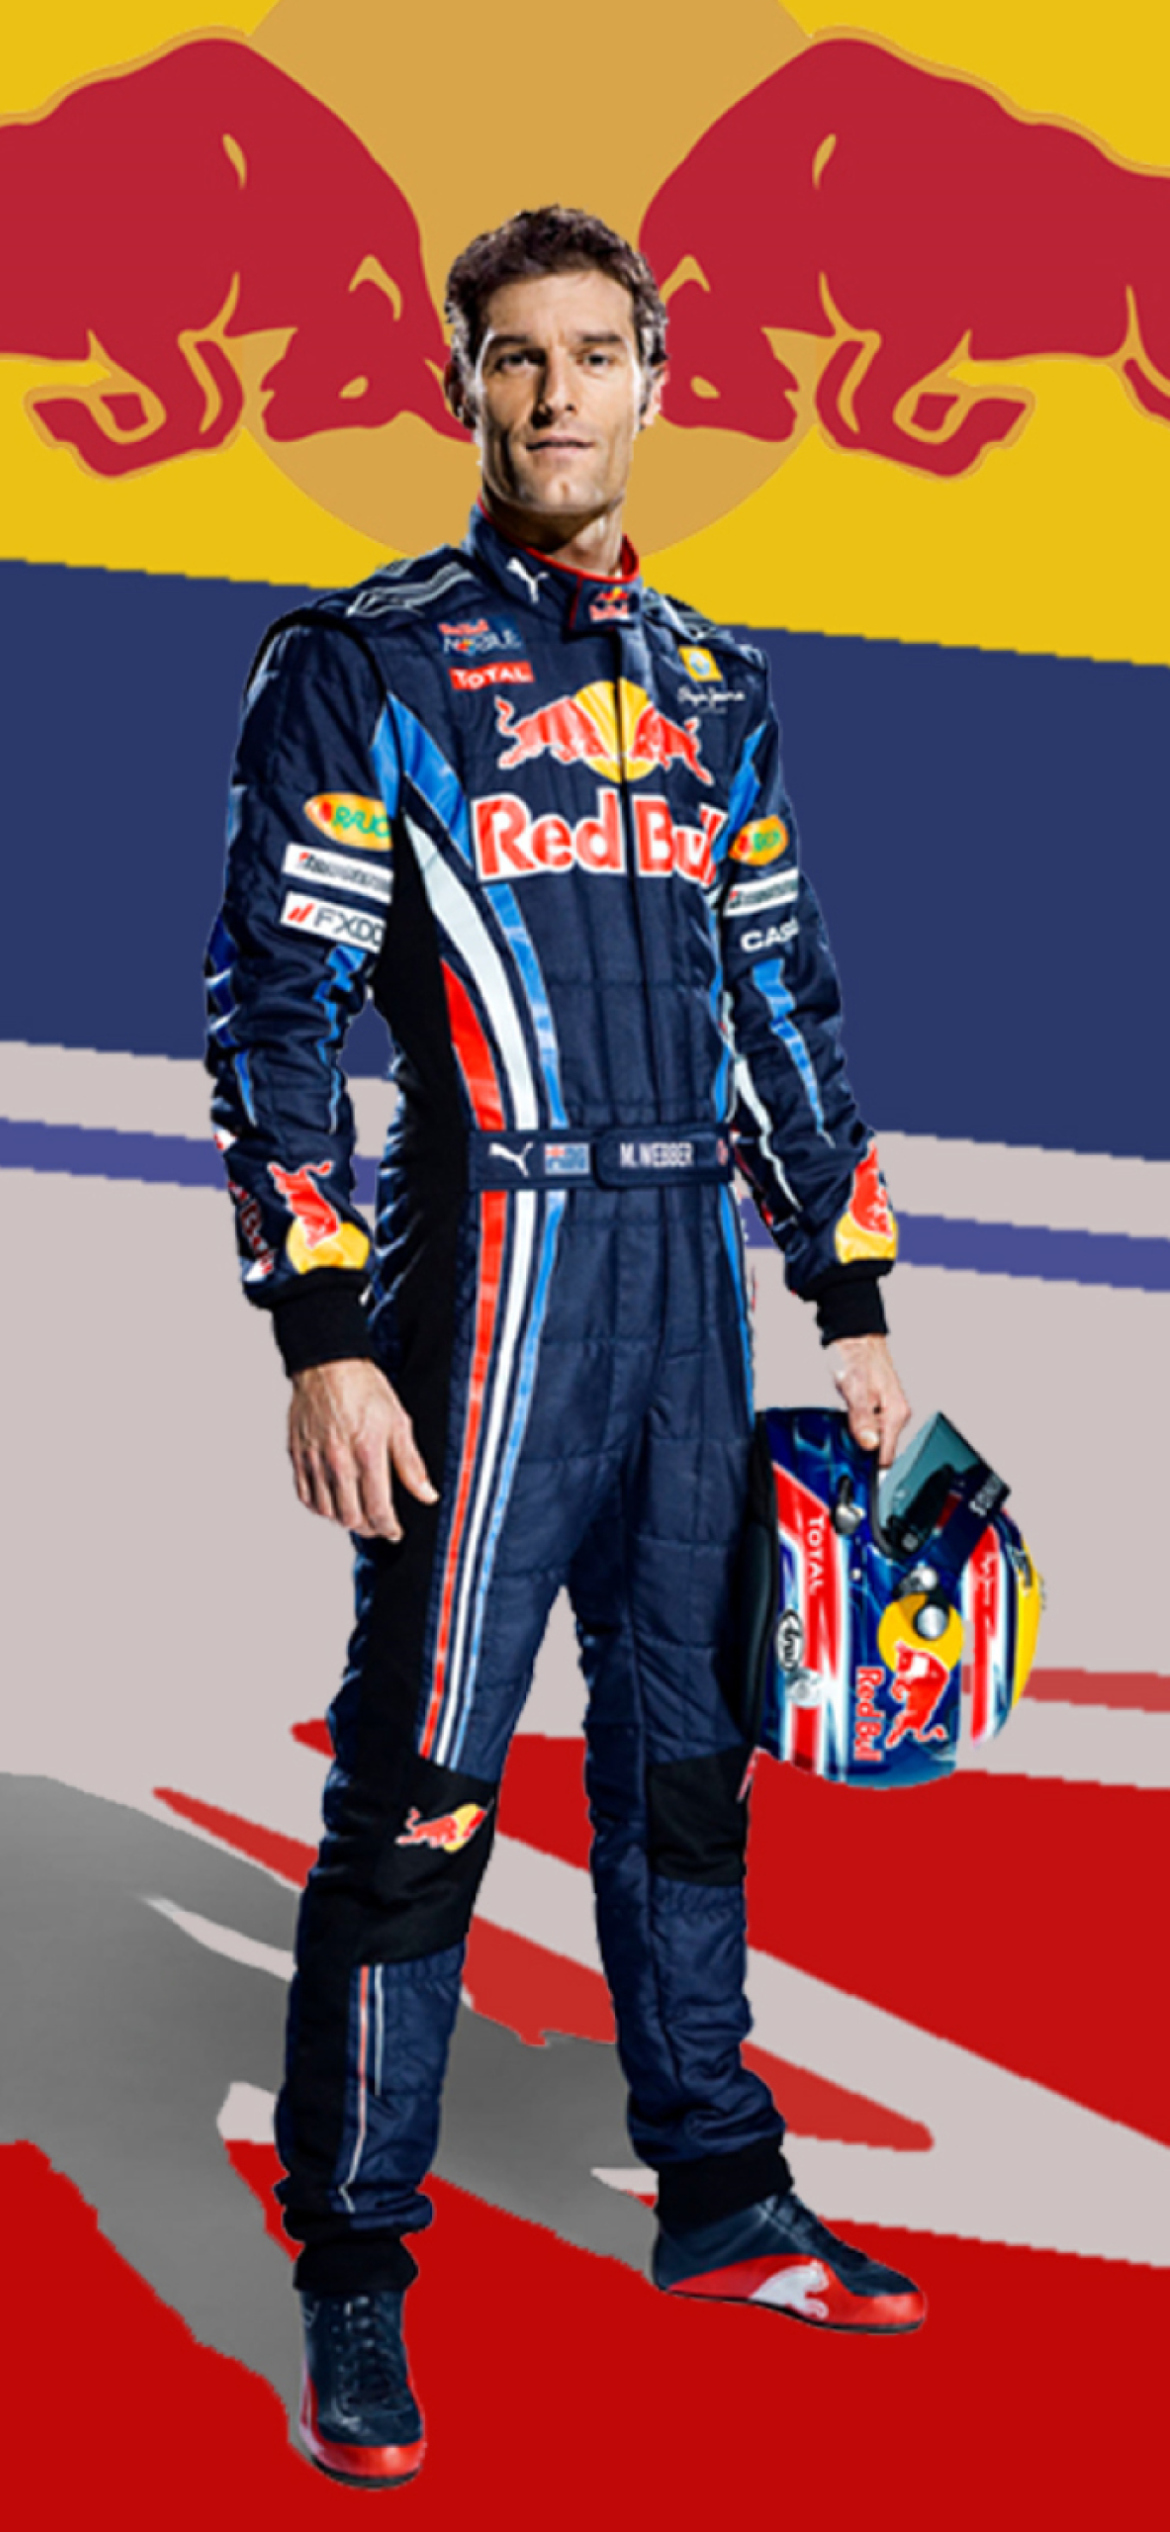 Red Bull Racing Wallpaper For Iphone 12 Pro